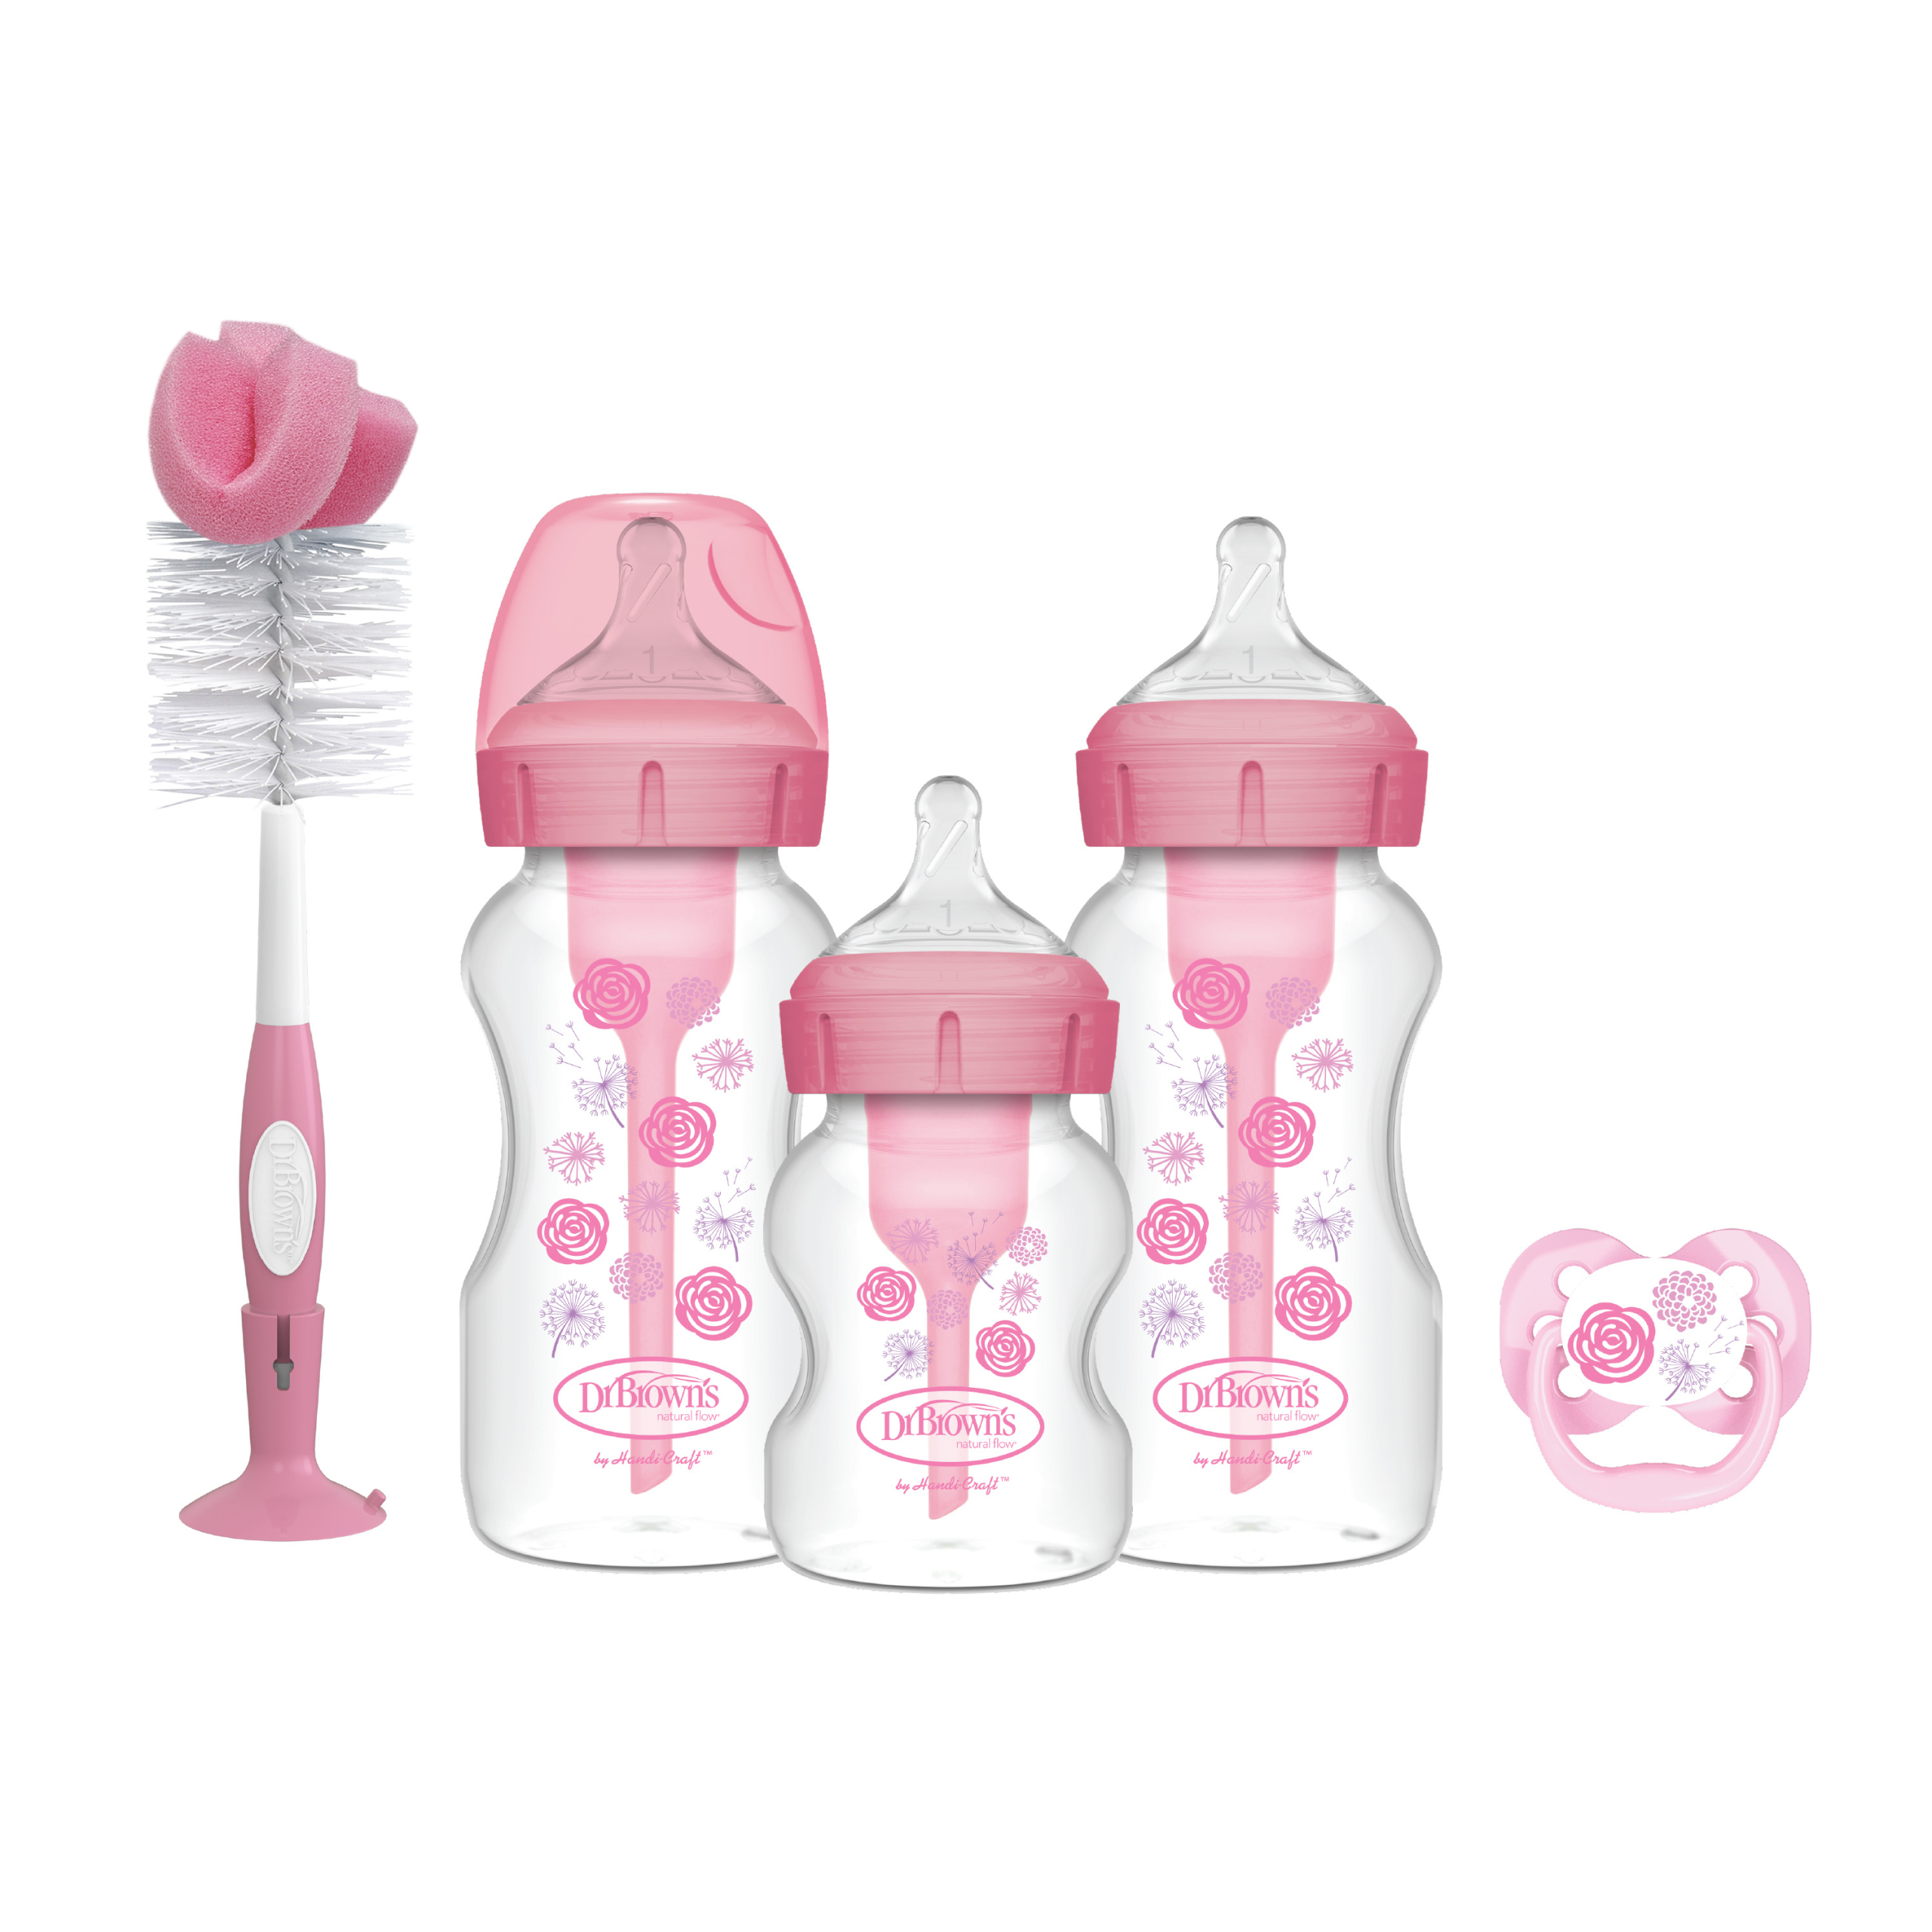 Dr Brown - Options+ Anti-Colic Bottle Gift Set